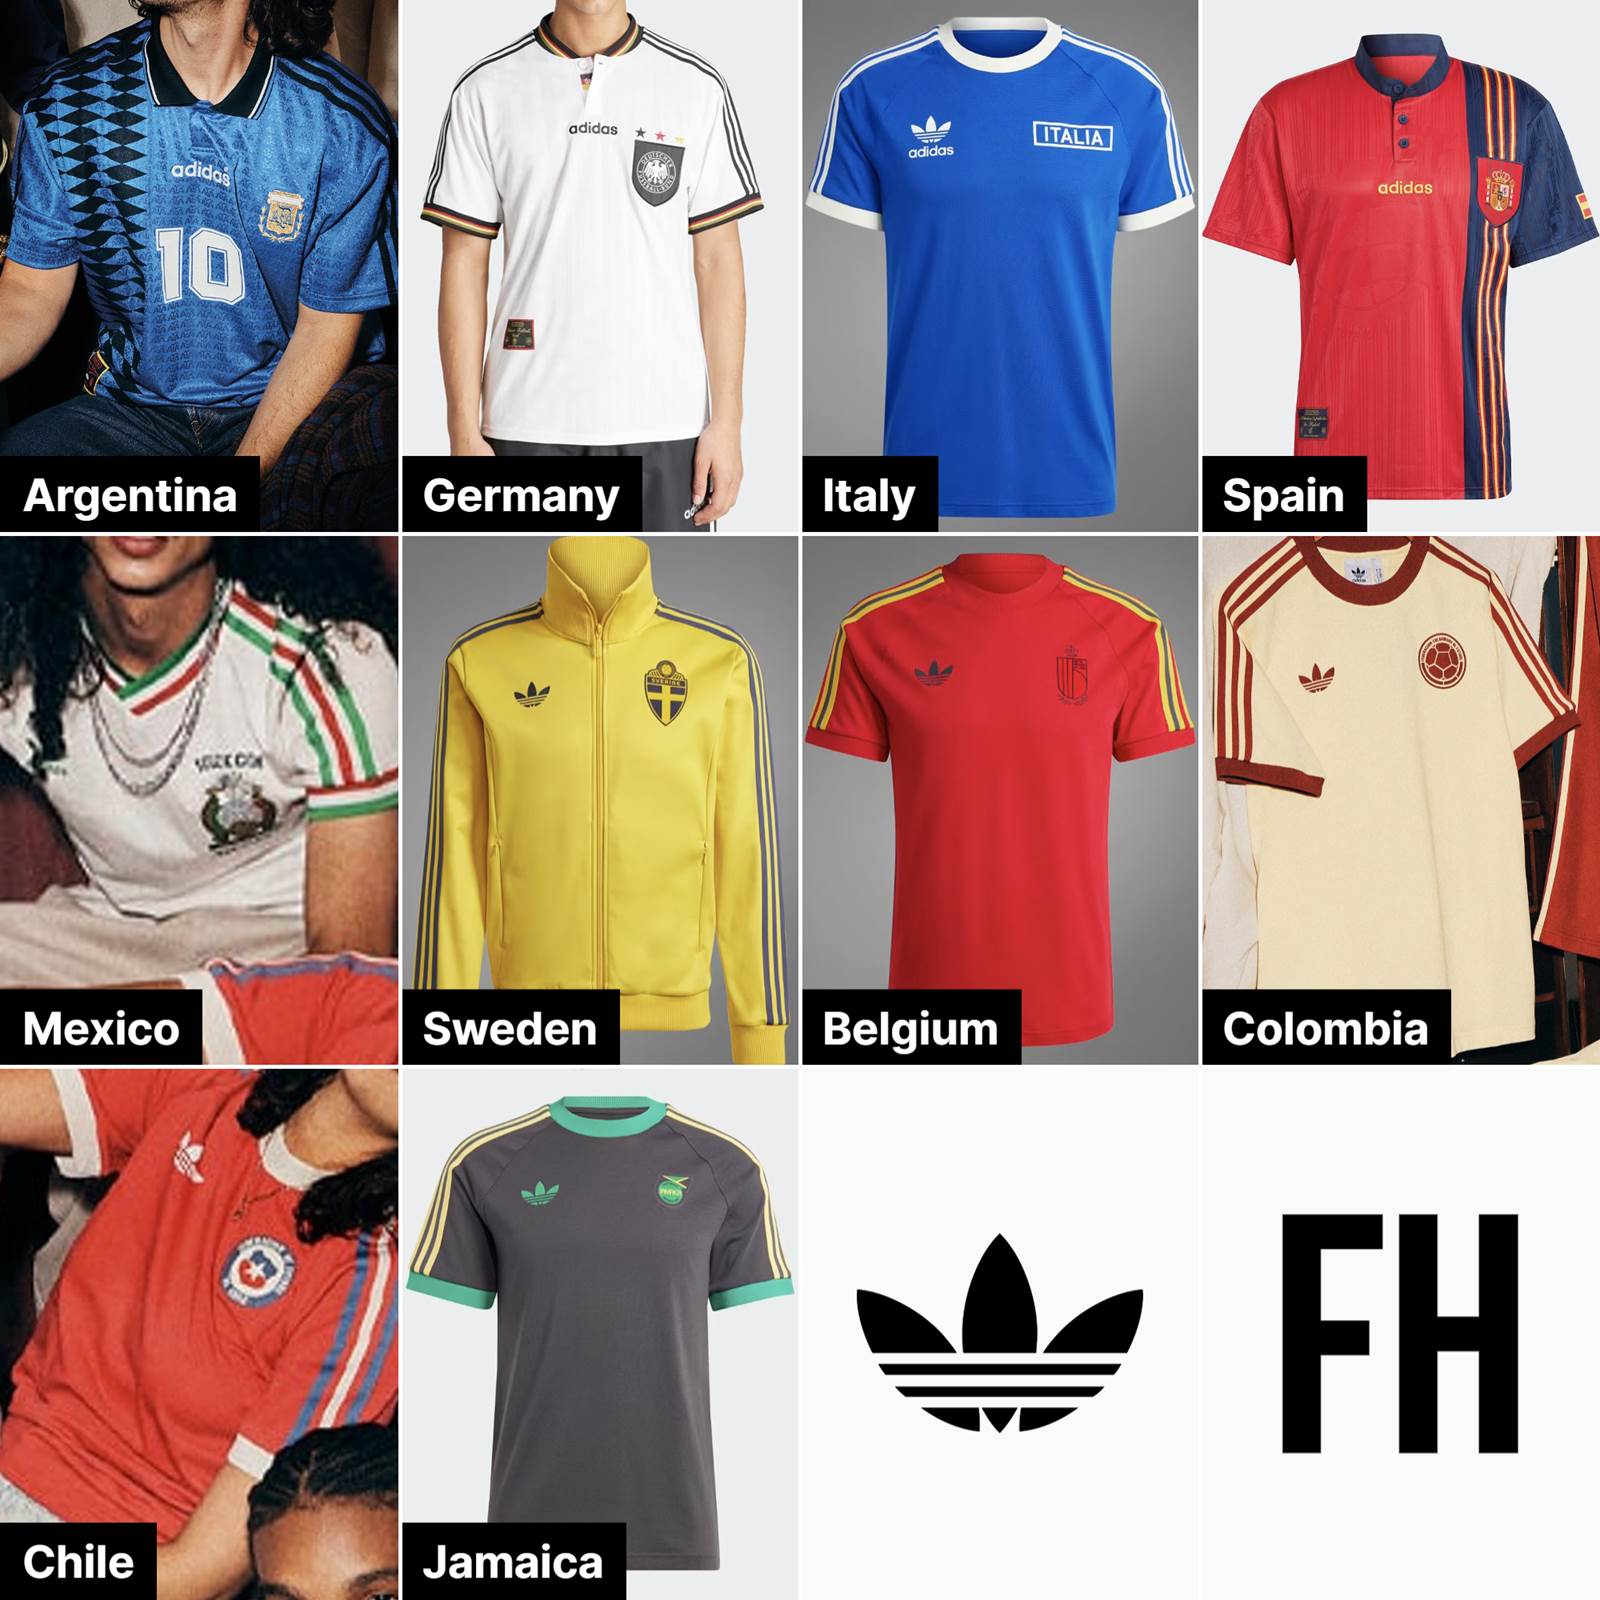 Adidas National Team Retro Kits + Collections Released - 10 National ...